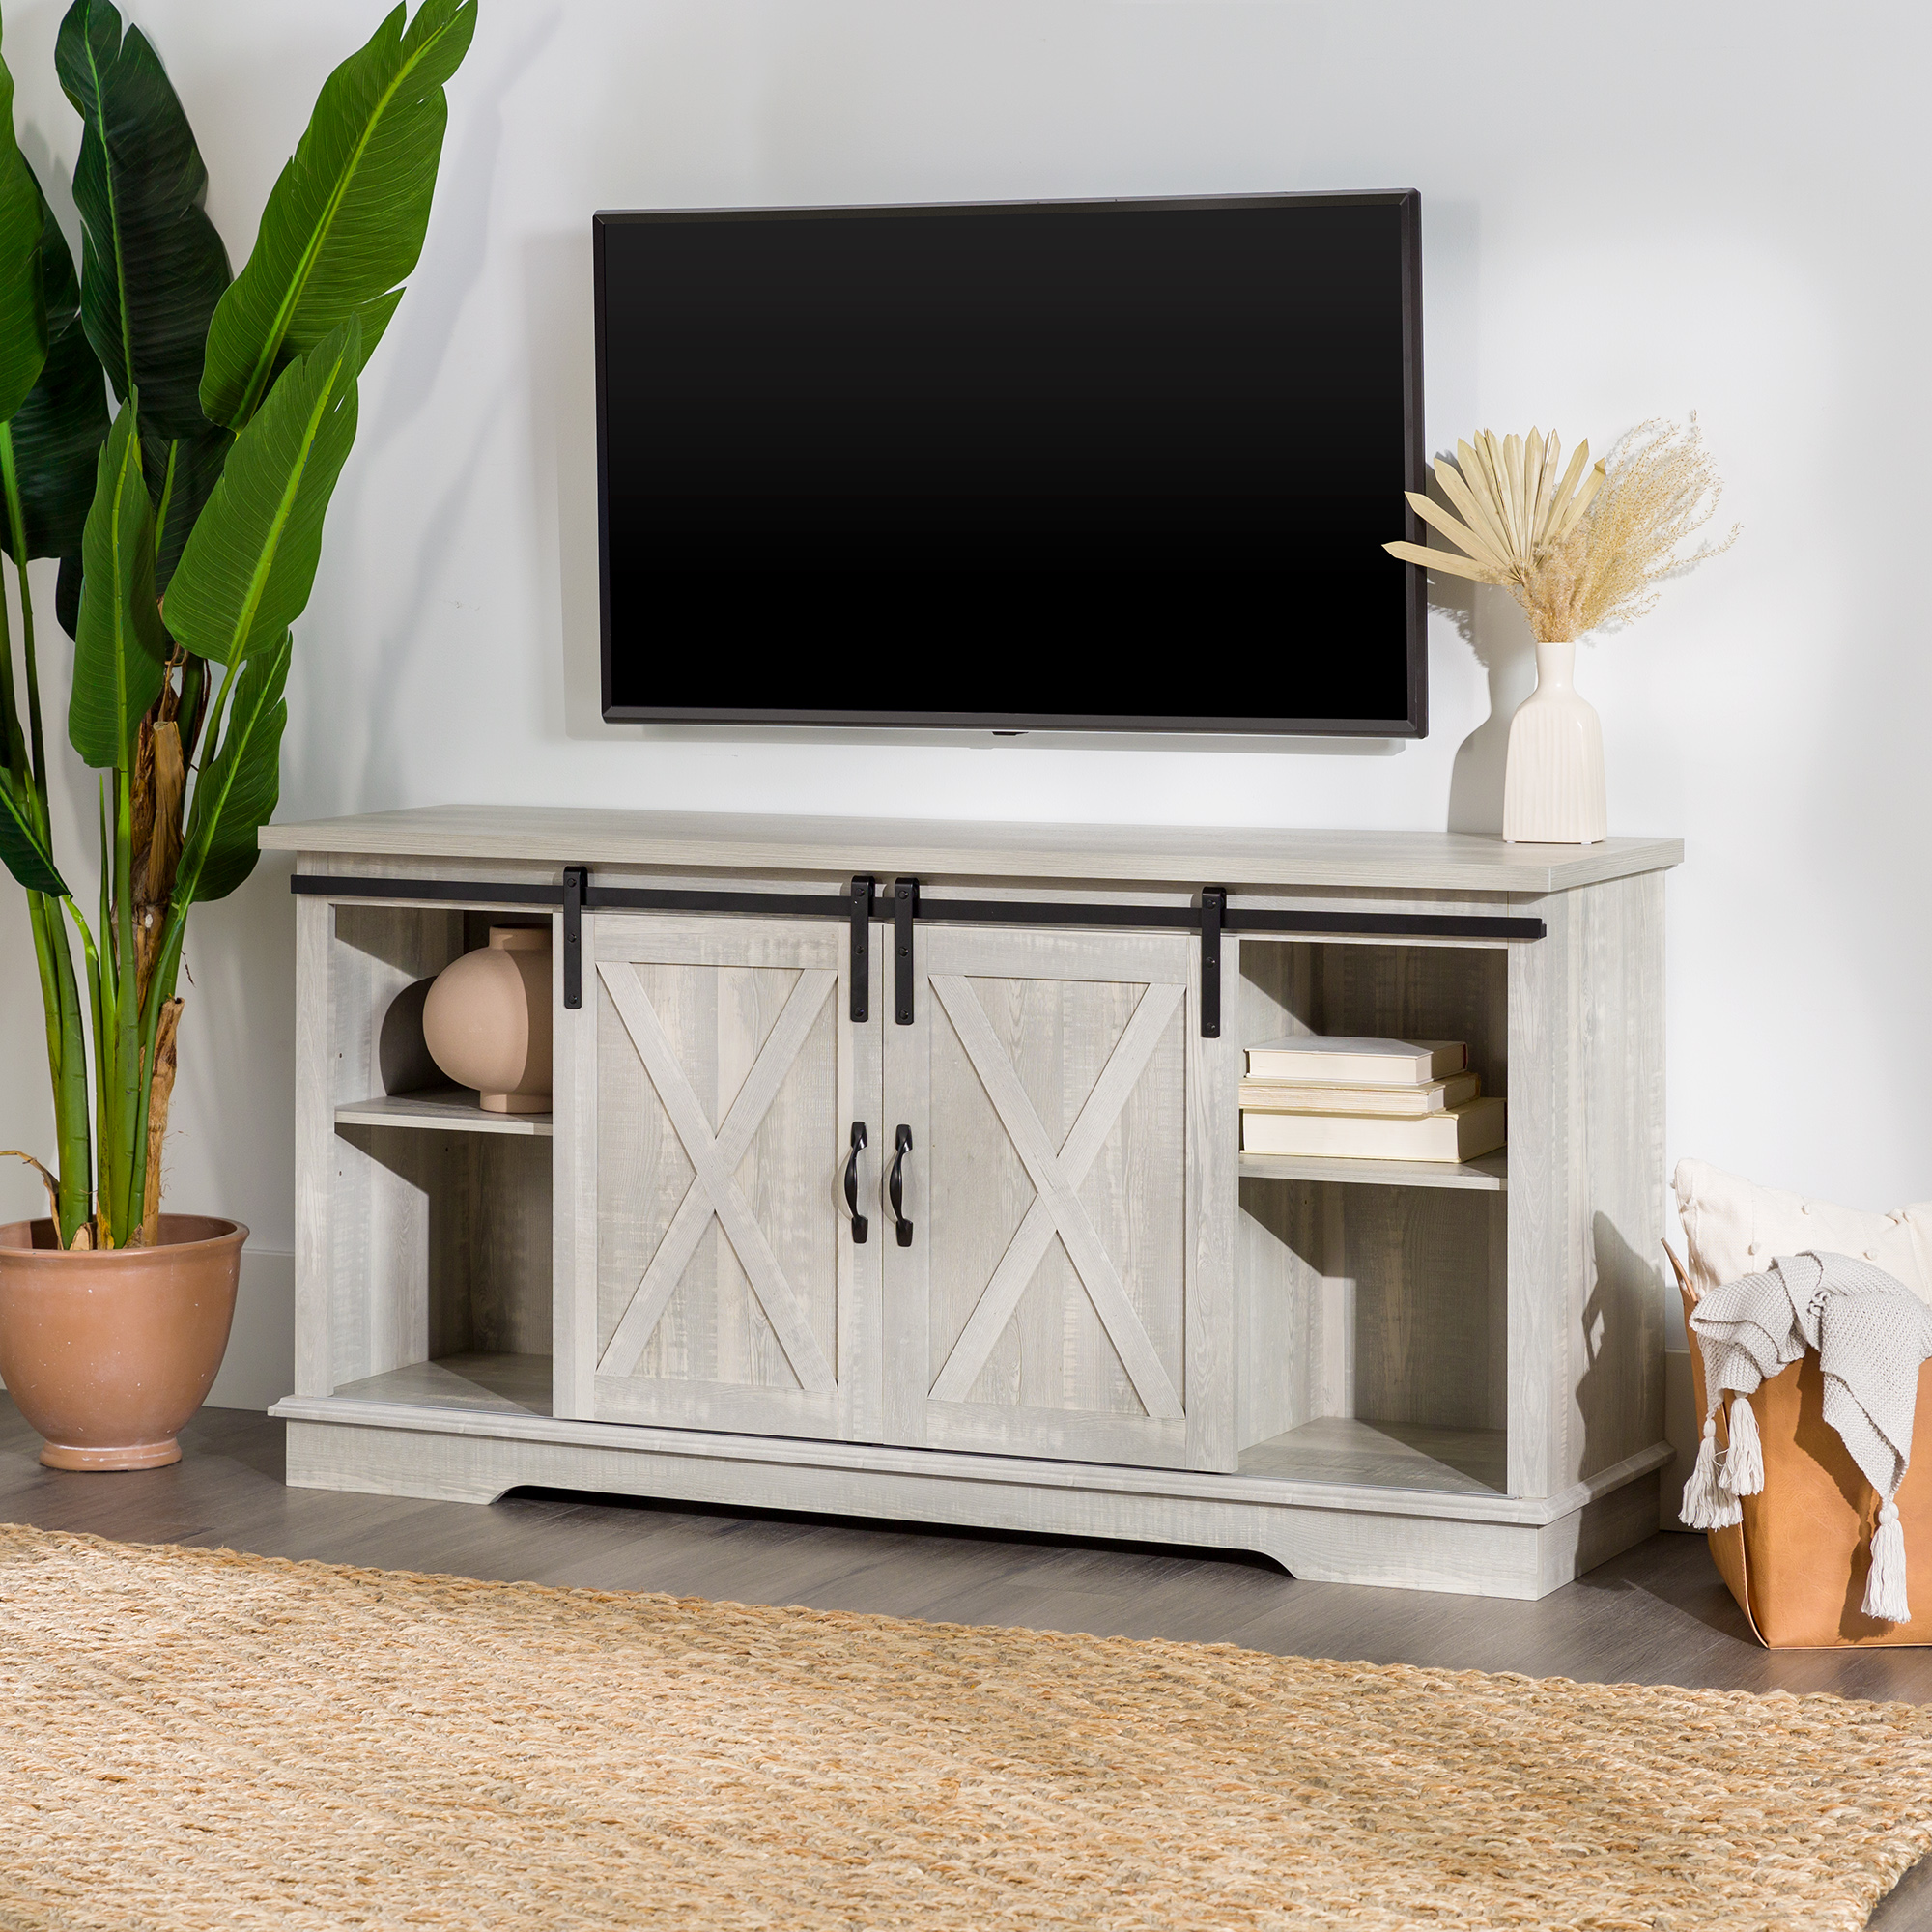 Woven Paths Sliding Farmhouse Barn Door TV Stand for TVs up to 65", Stone Grey - image 4 of 16